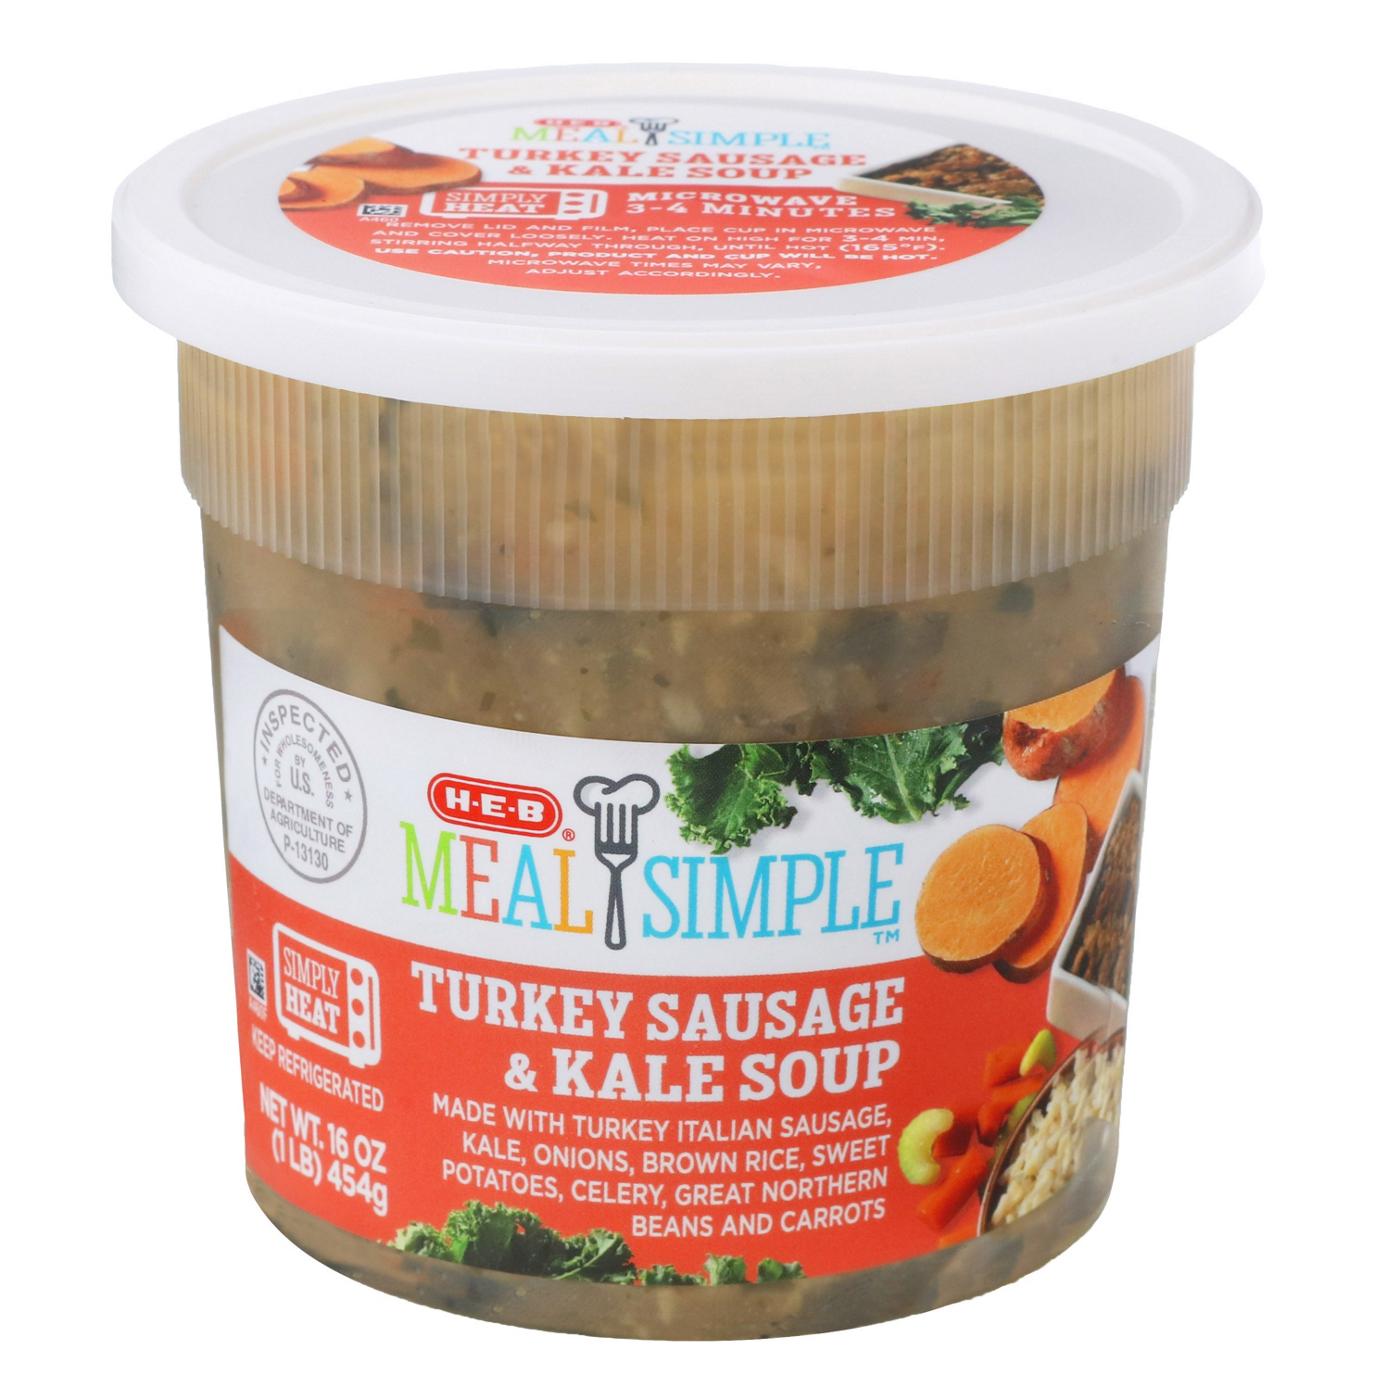 Meal Simple by H-E-B Turkey Sausage Kale Soup; image 3 of 3